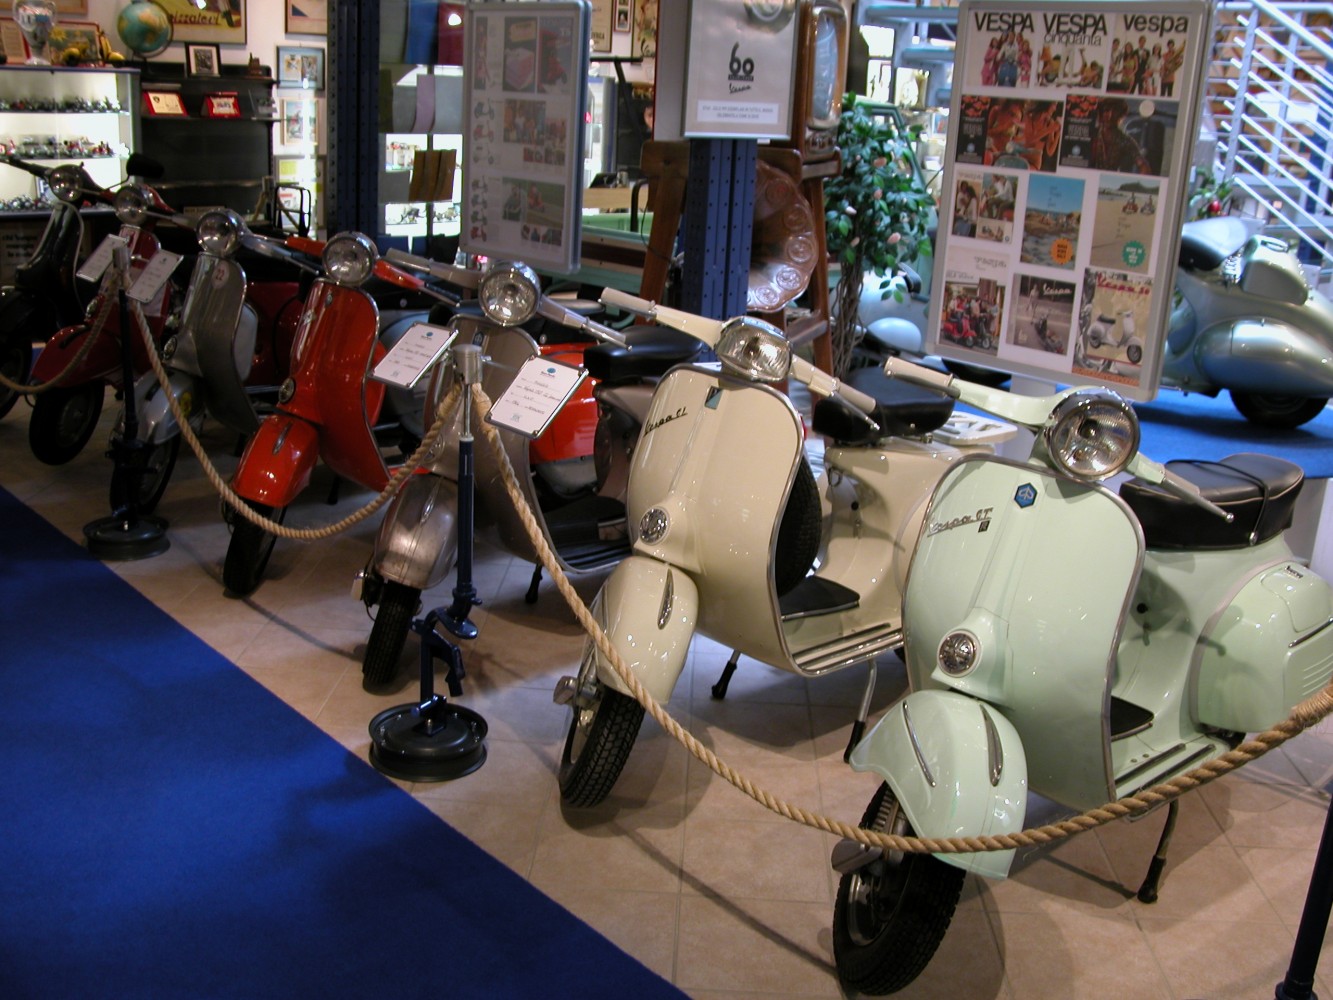 [MotorValley Presents] The Vespa Museum of Ravenna